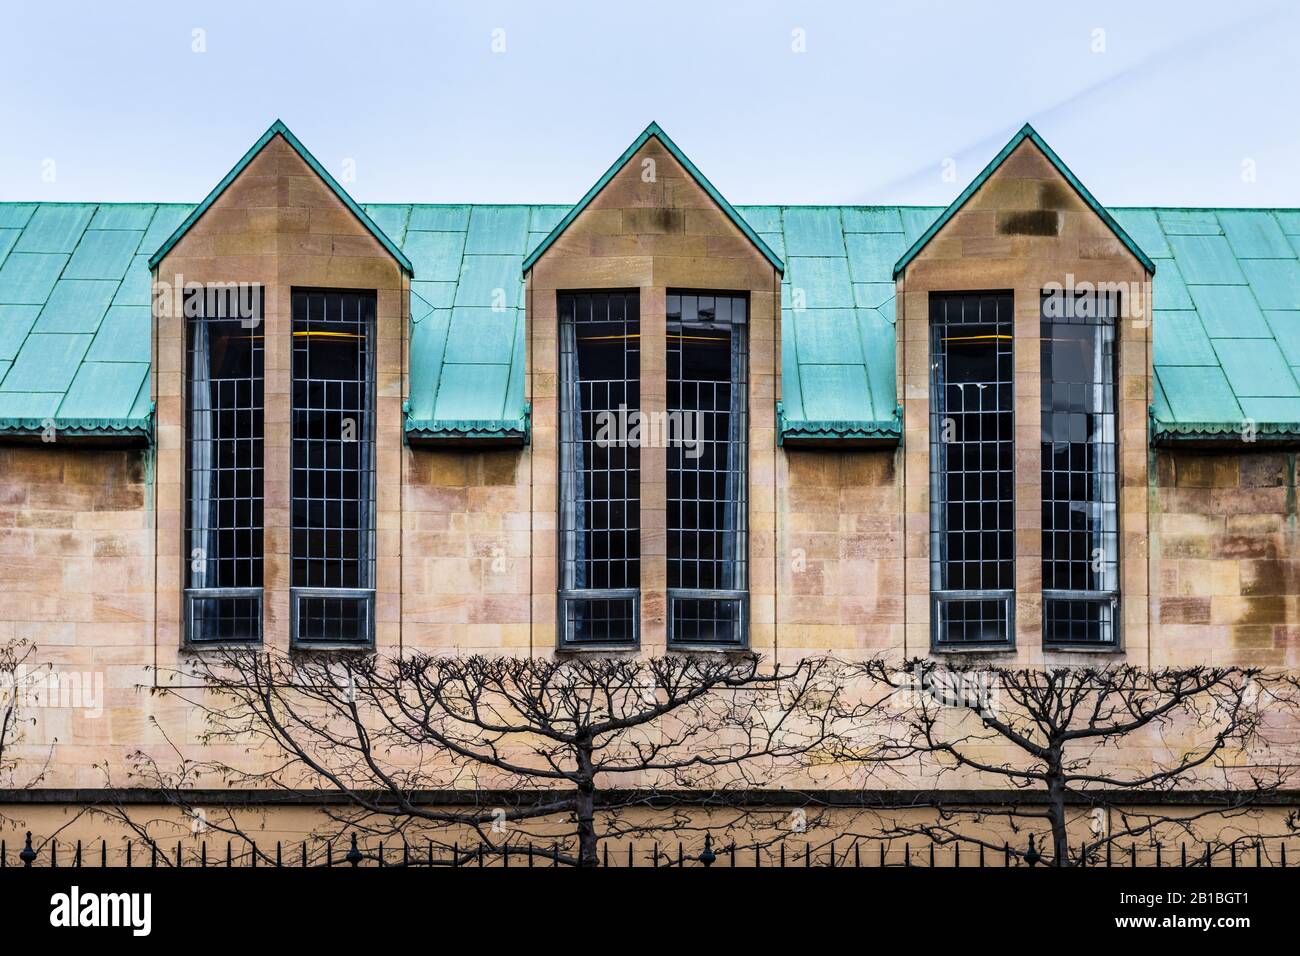 The Upper Hall Emmanuel College Cambridge University. Extension to the main entrance building, architect Robert Hurd, 1959. Scottish Lowlands style. Stock Photo